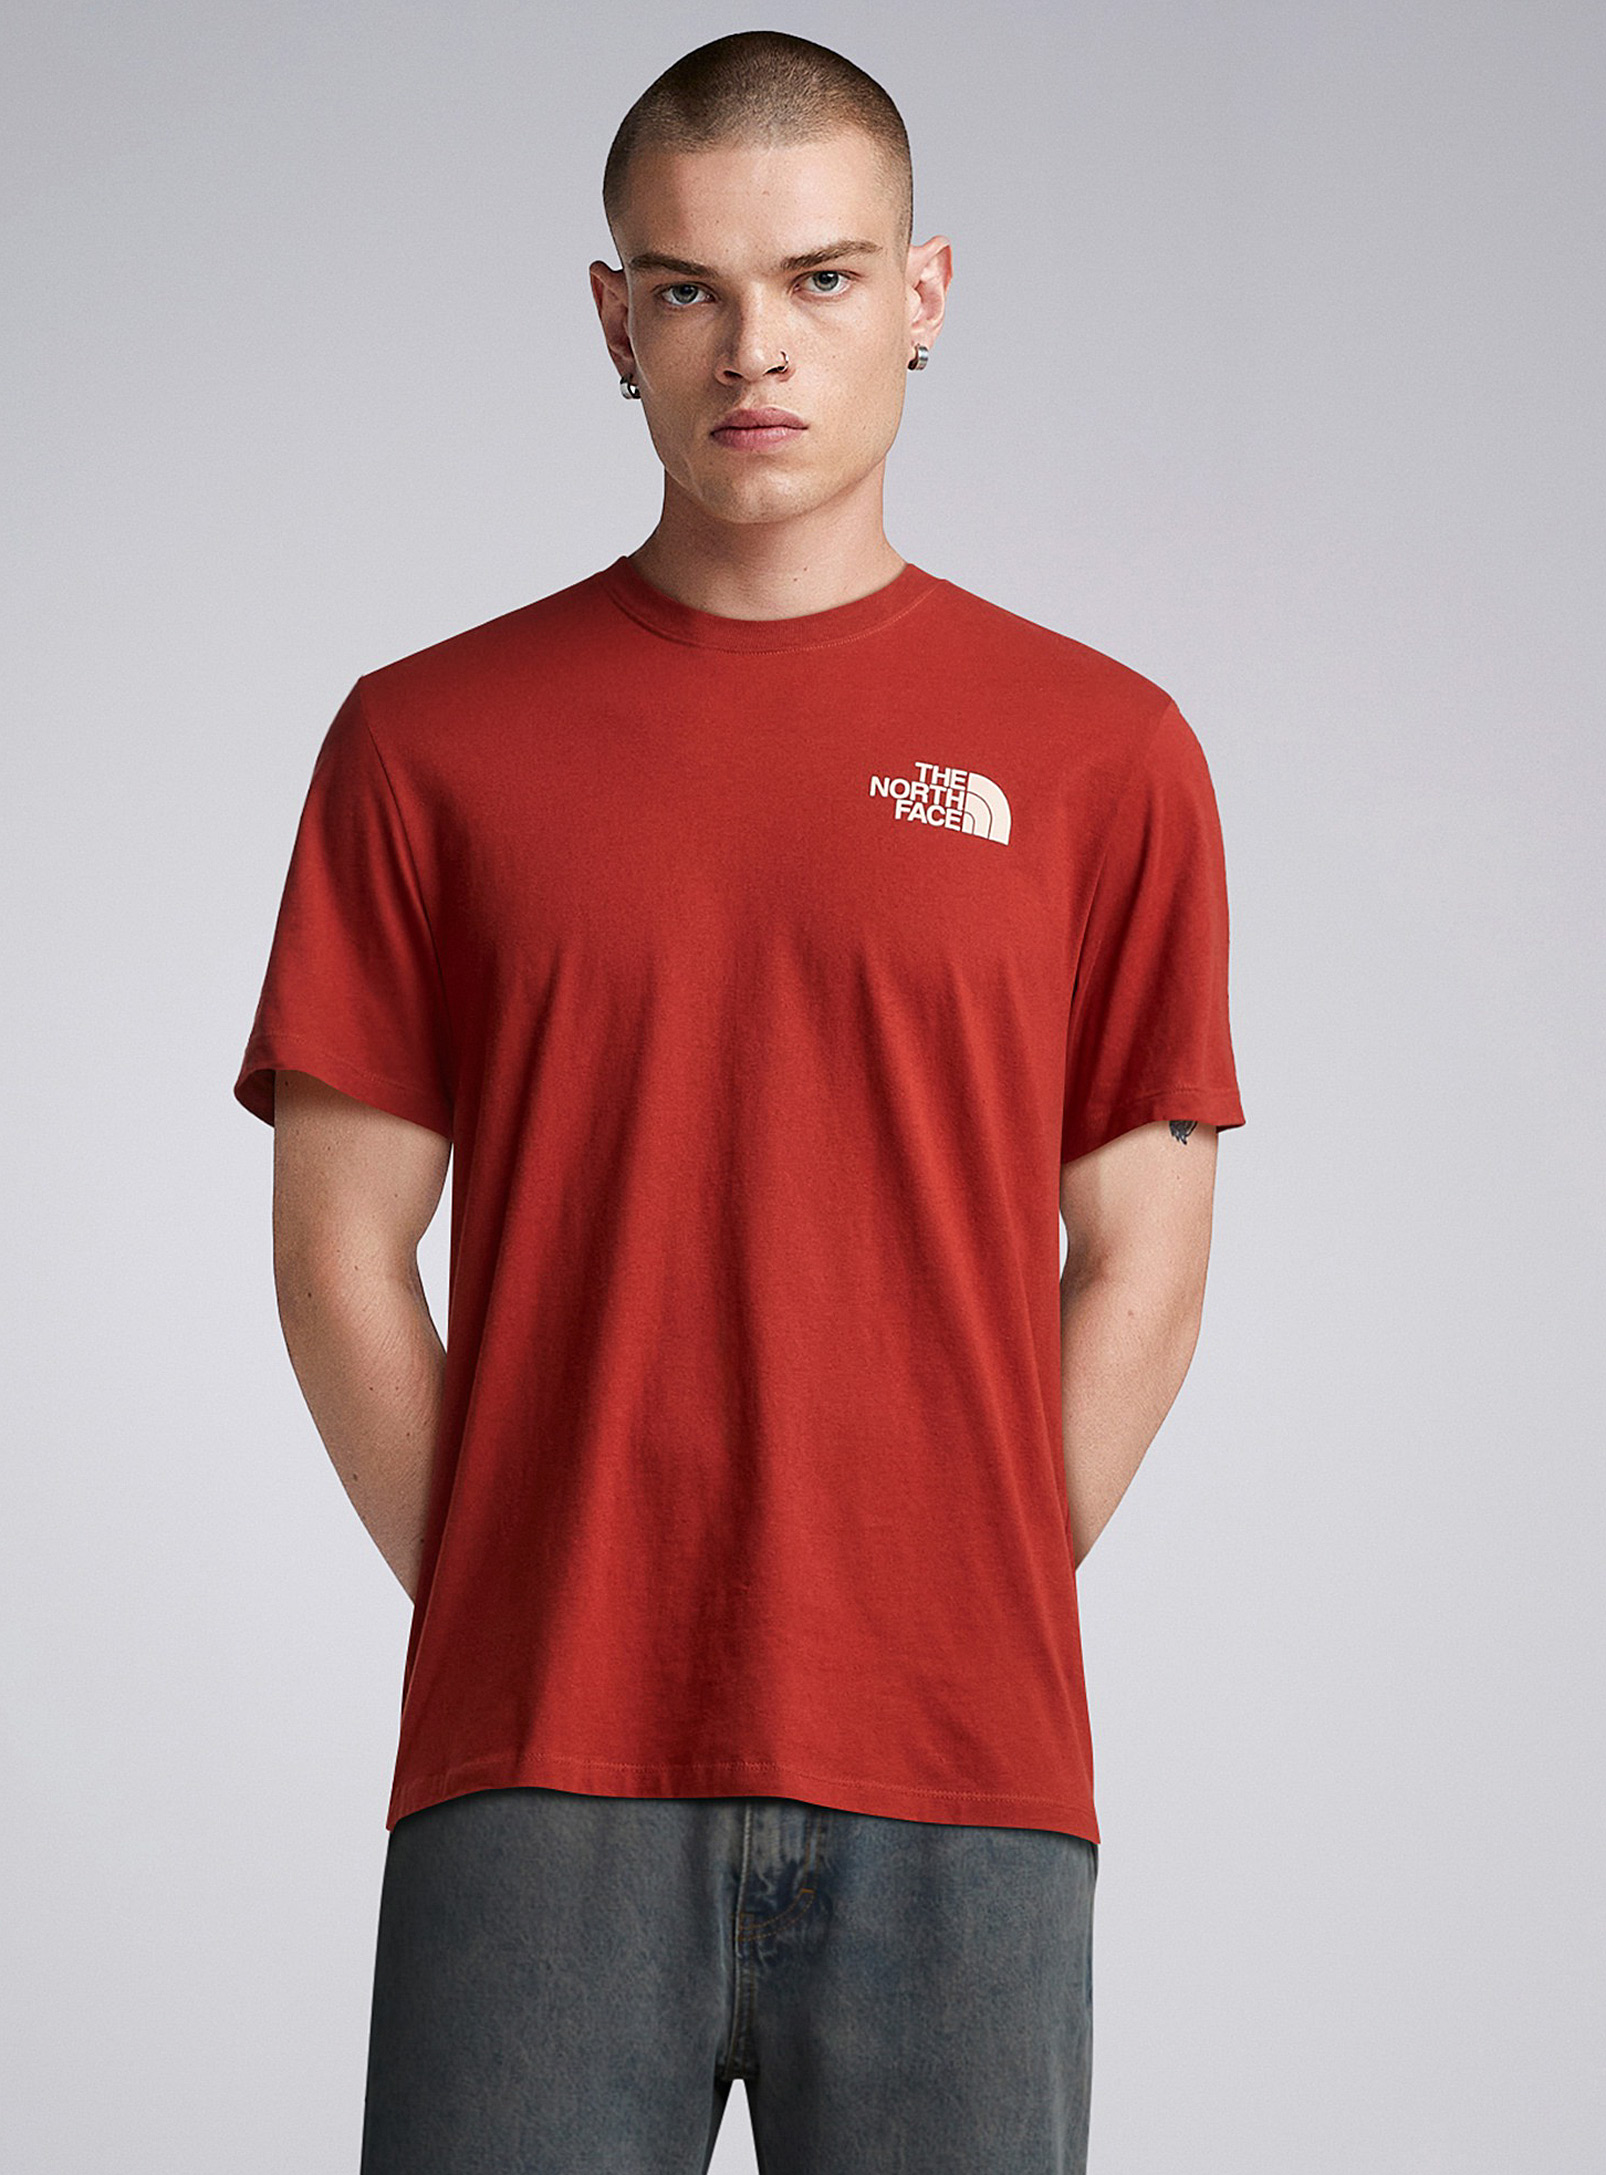 The North Face Places We Love T-shirt In Burgundy